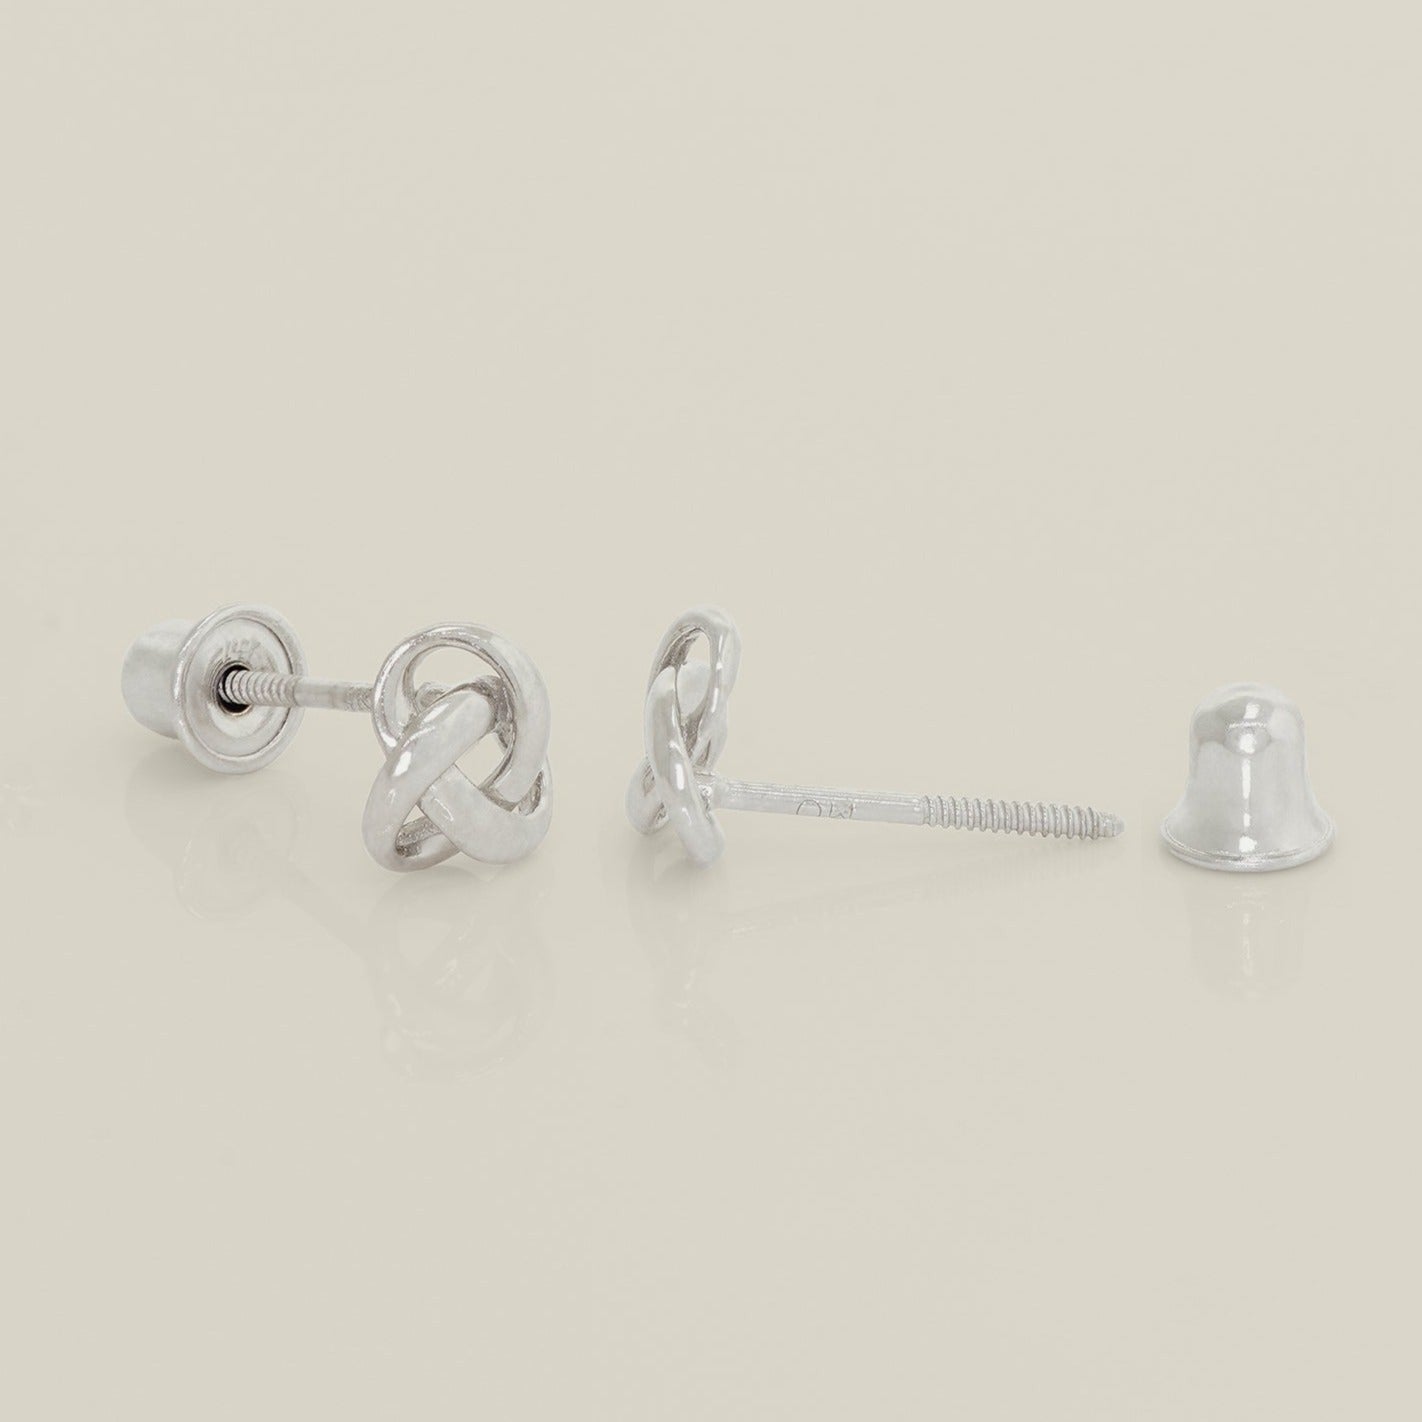 14K Gold Endless Symbol Screw-back Stud Earrings - Anygolds